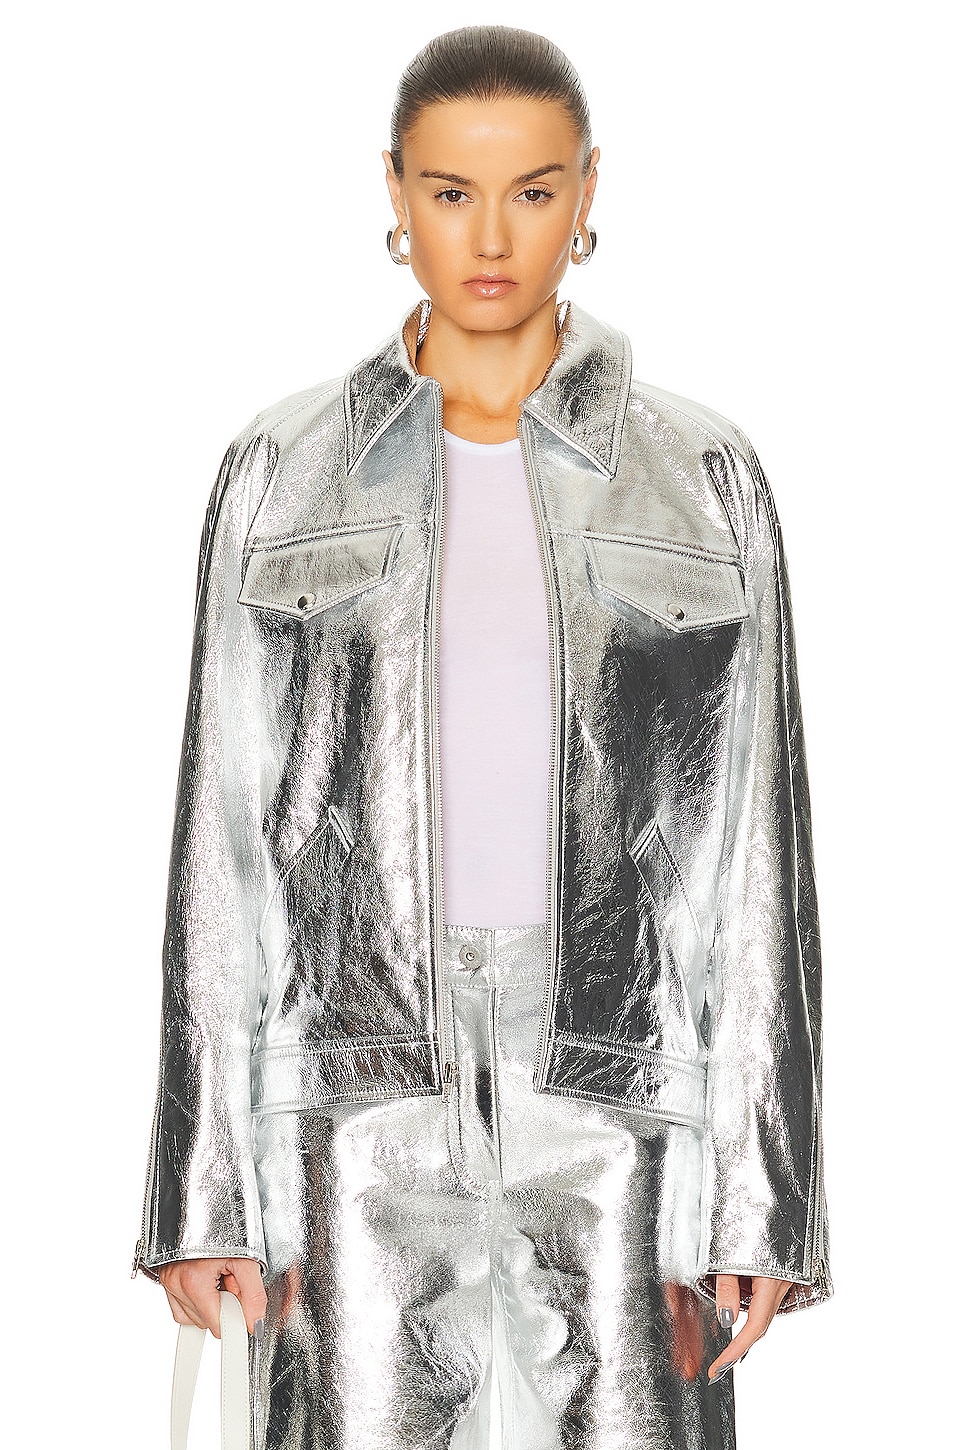 The Sterling Jacket in Metallic Silver